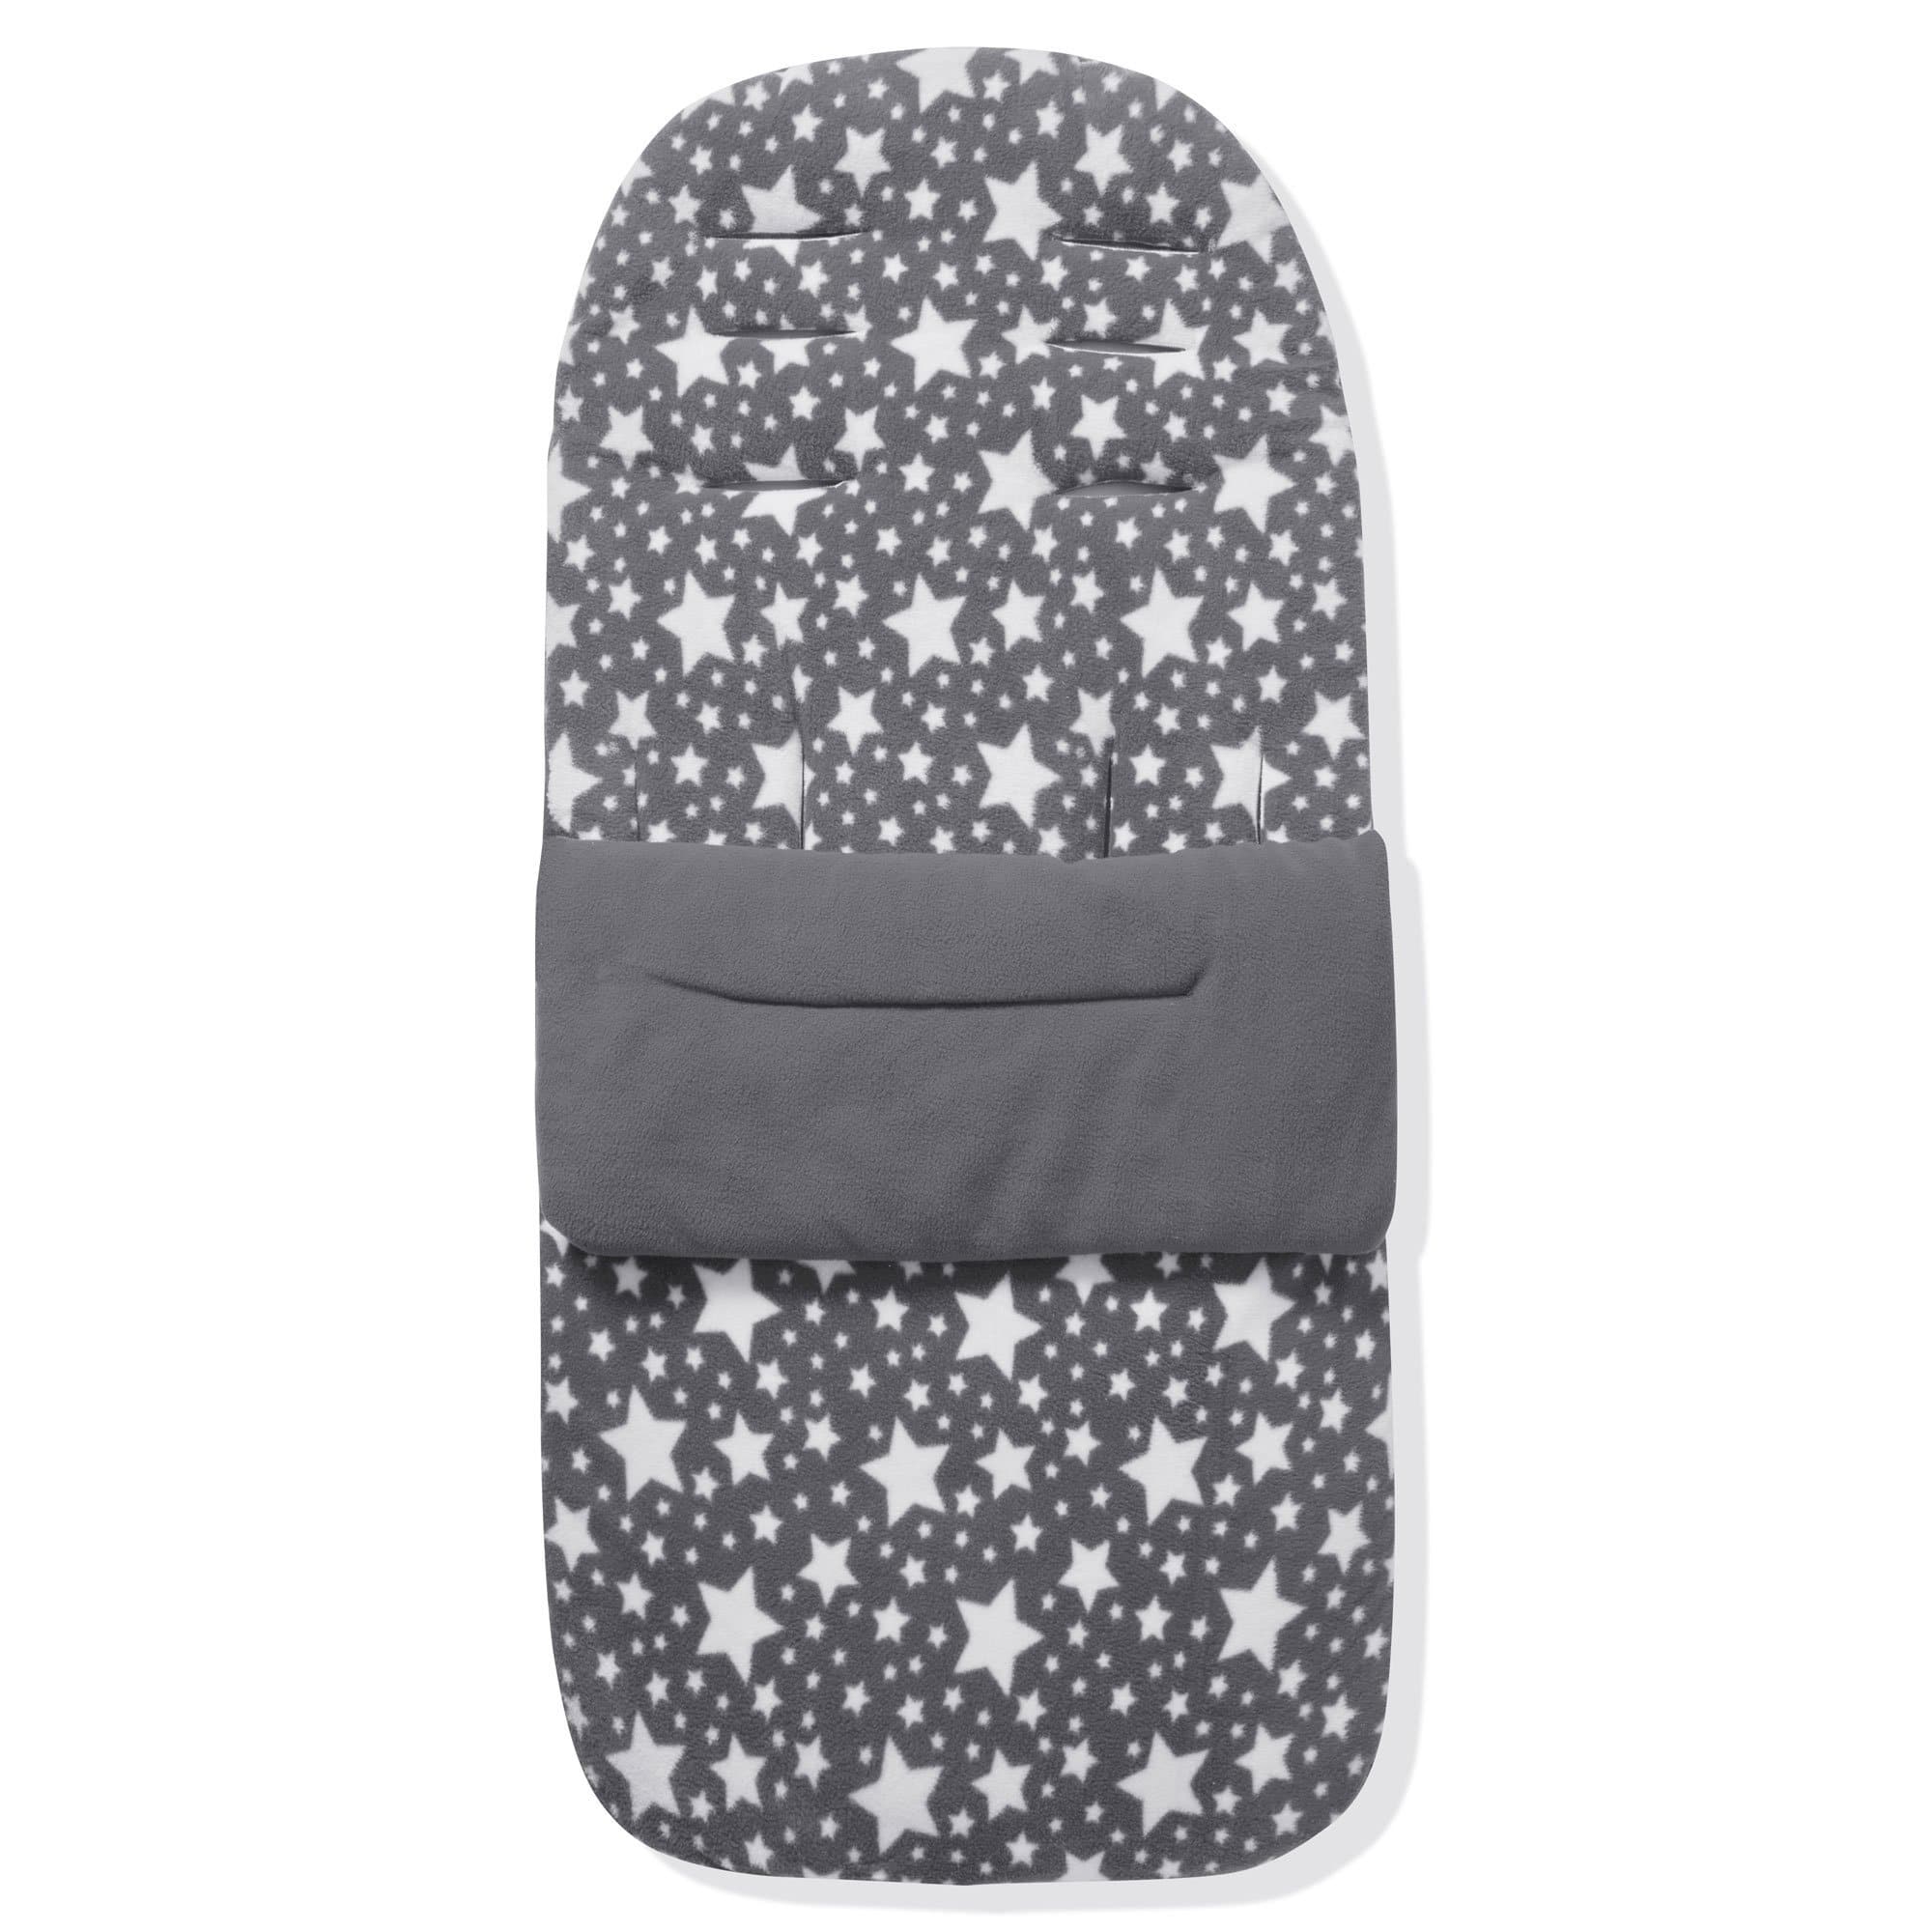 Fleece Footmuff / Cosy Toes Compatible with Seed - For Your Little One